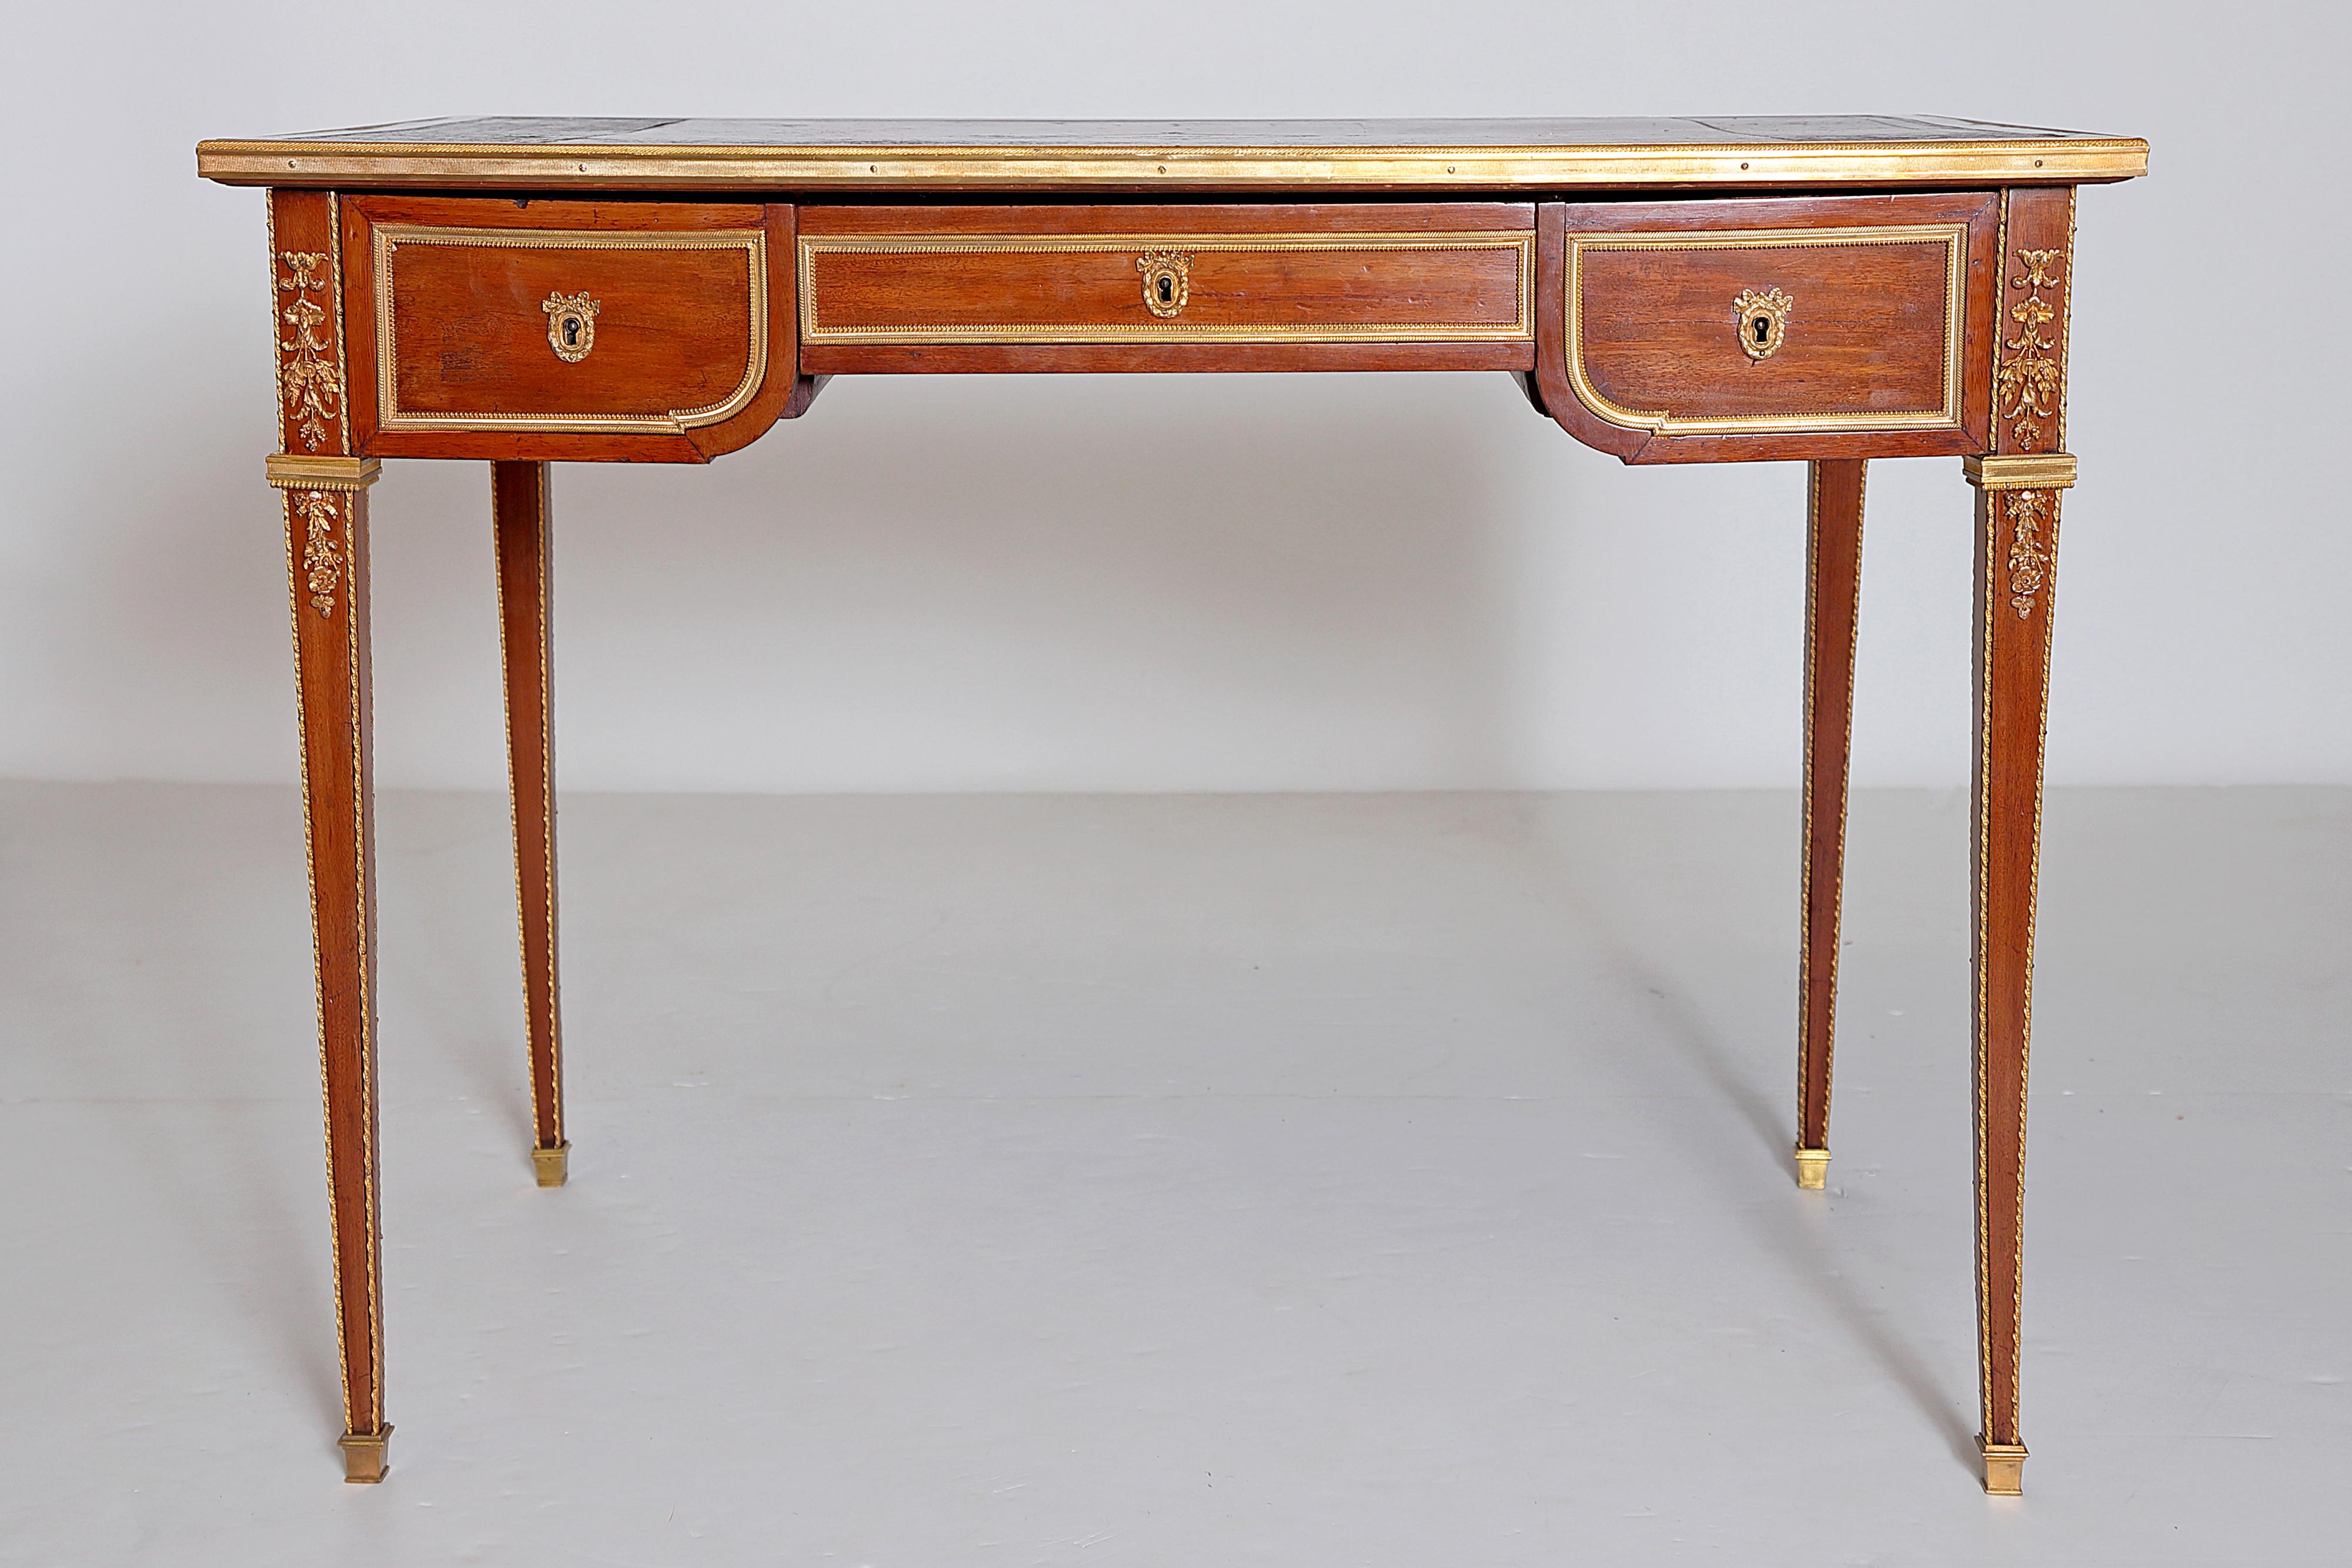 A small, elegant Louis XVI style writing table, mahogany with ormolu, dark red leather writing surface with tooled (embossed) gilt trim around the edge and central diamond shaped ornament / design, the whole edge of the table top is trimmed in gilt